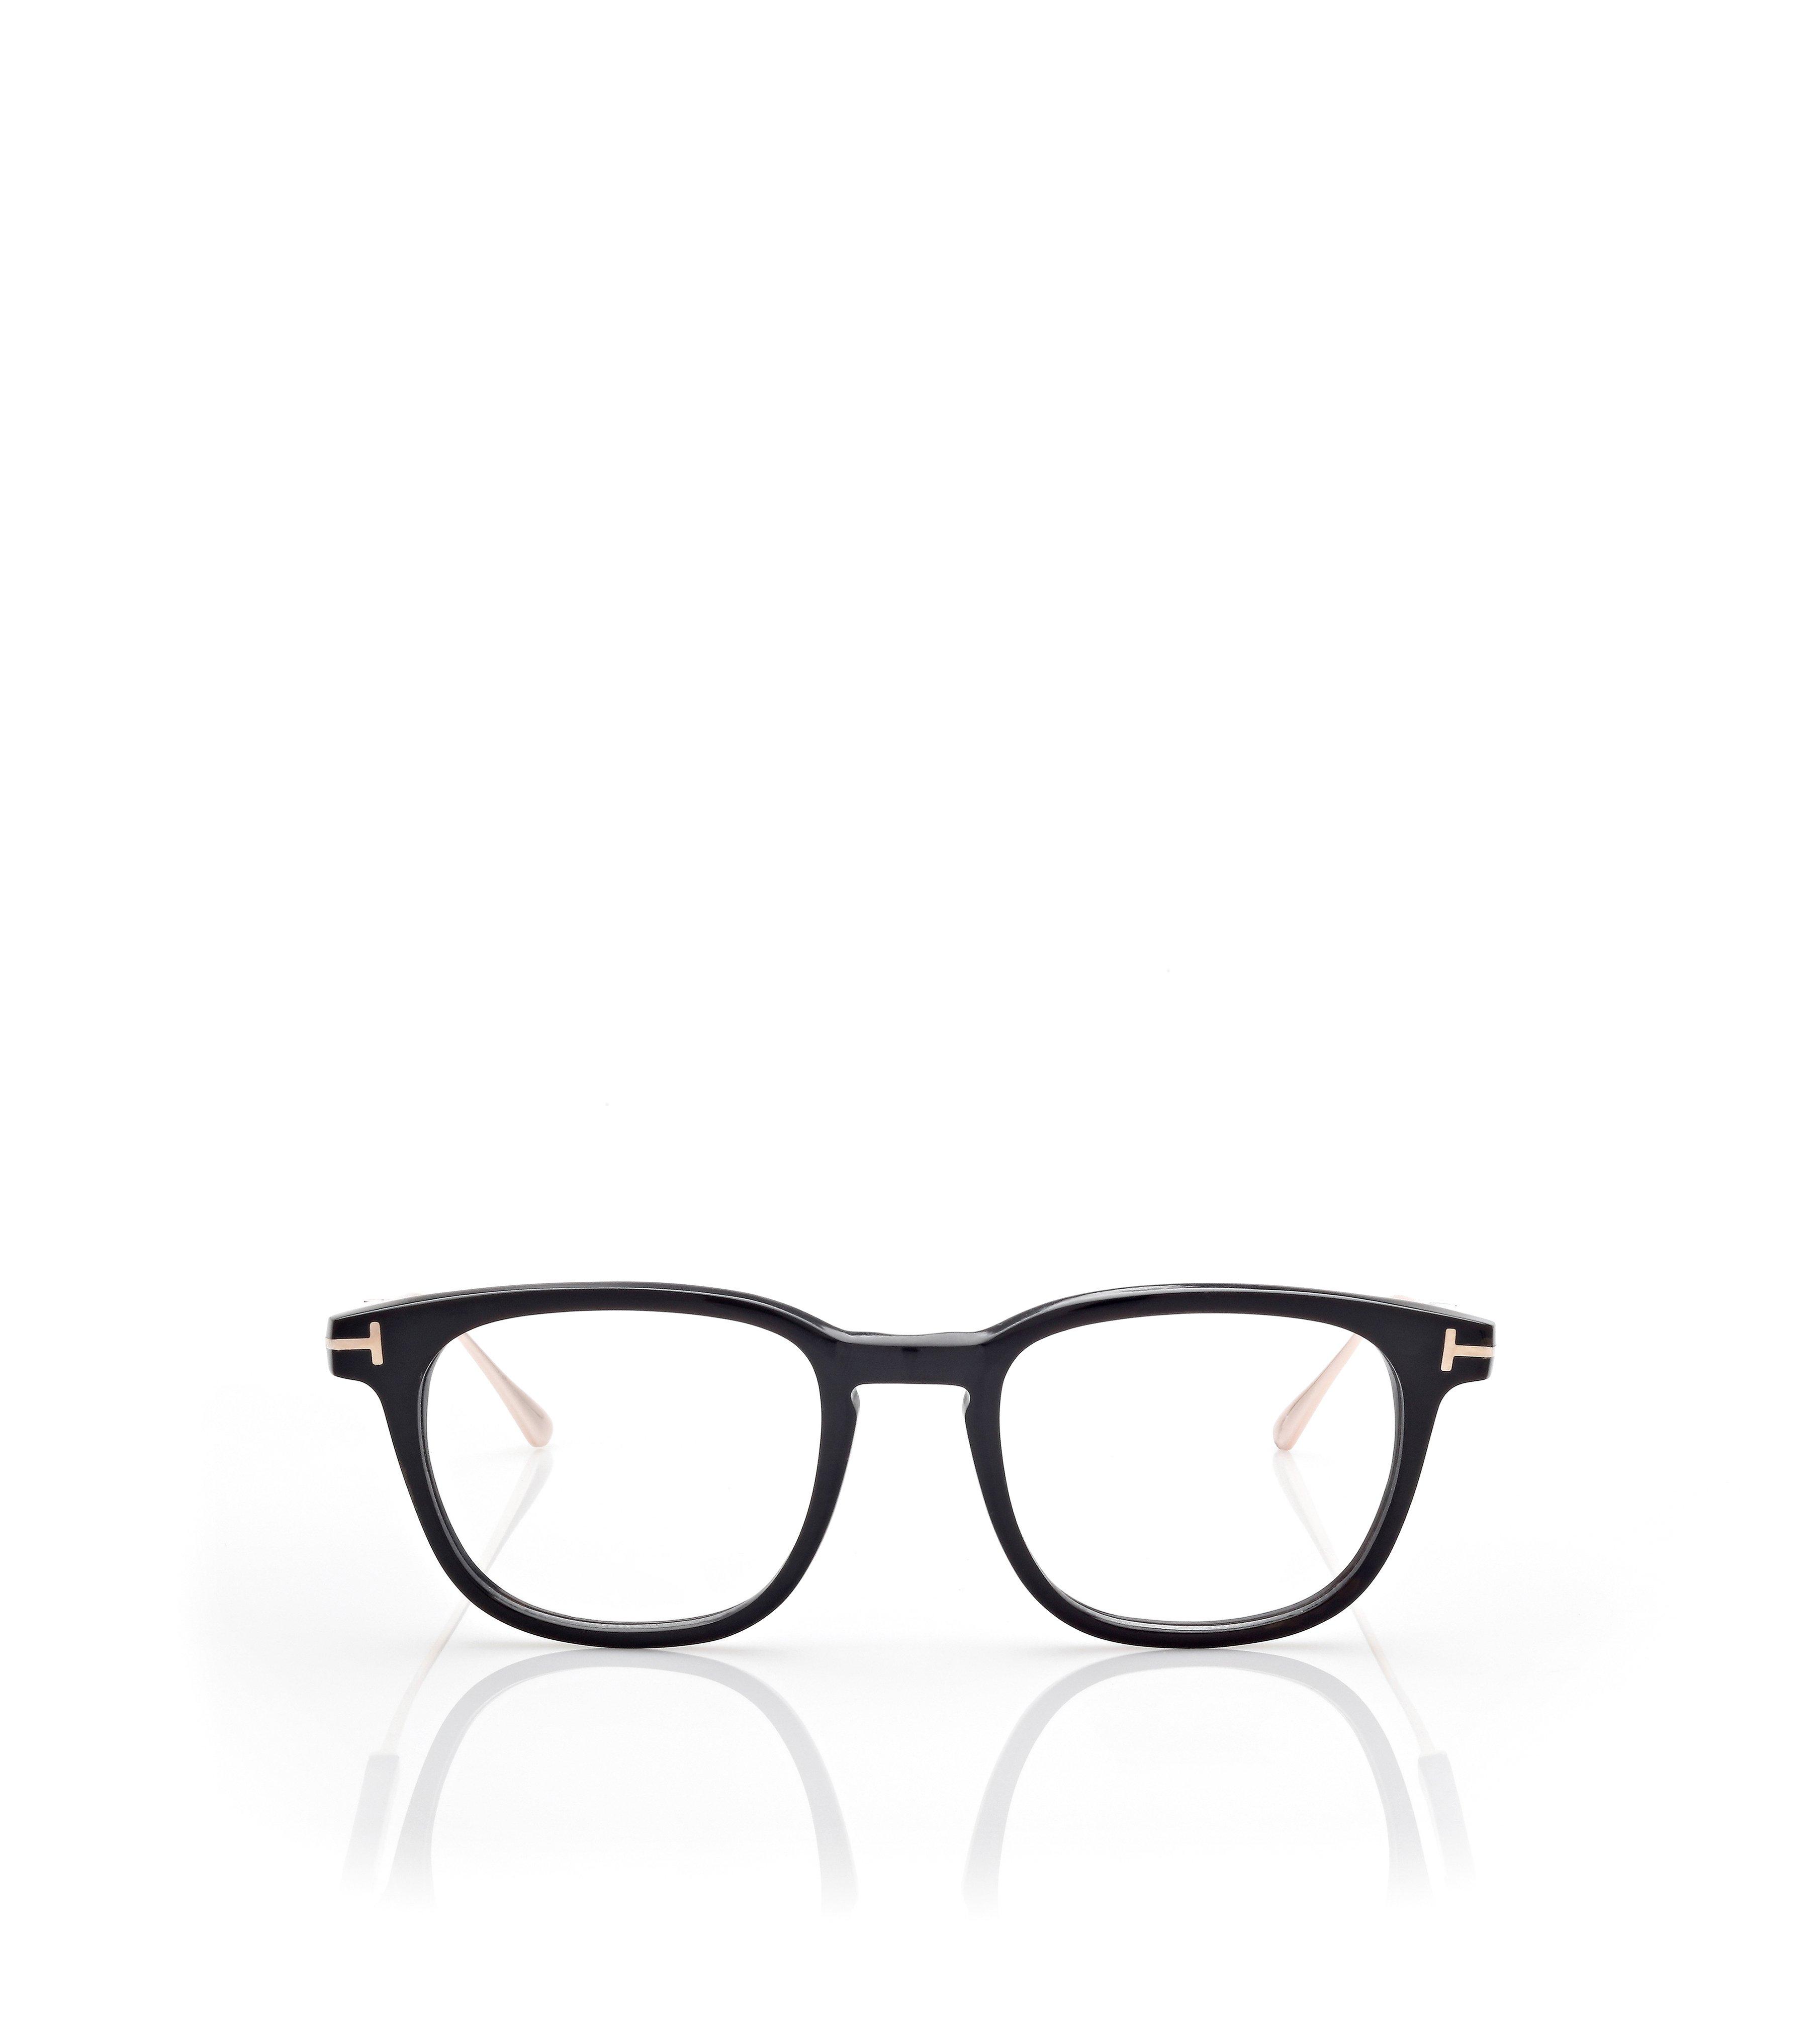 PRIVATE COLLECTION - Men's Eyewear | TomFord.com